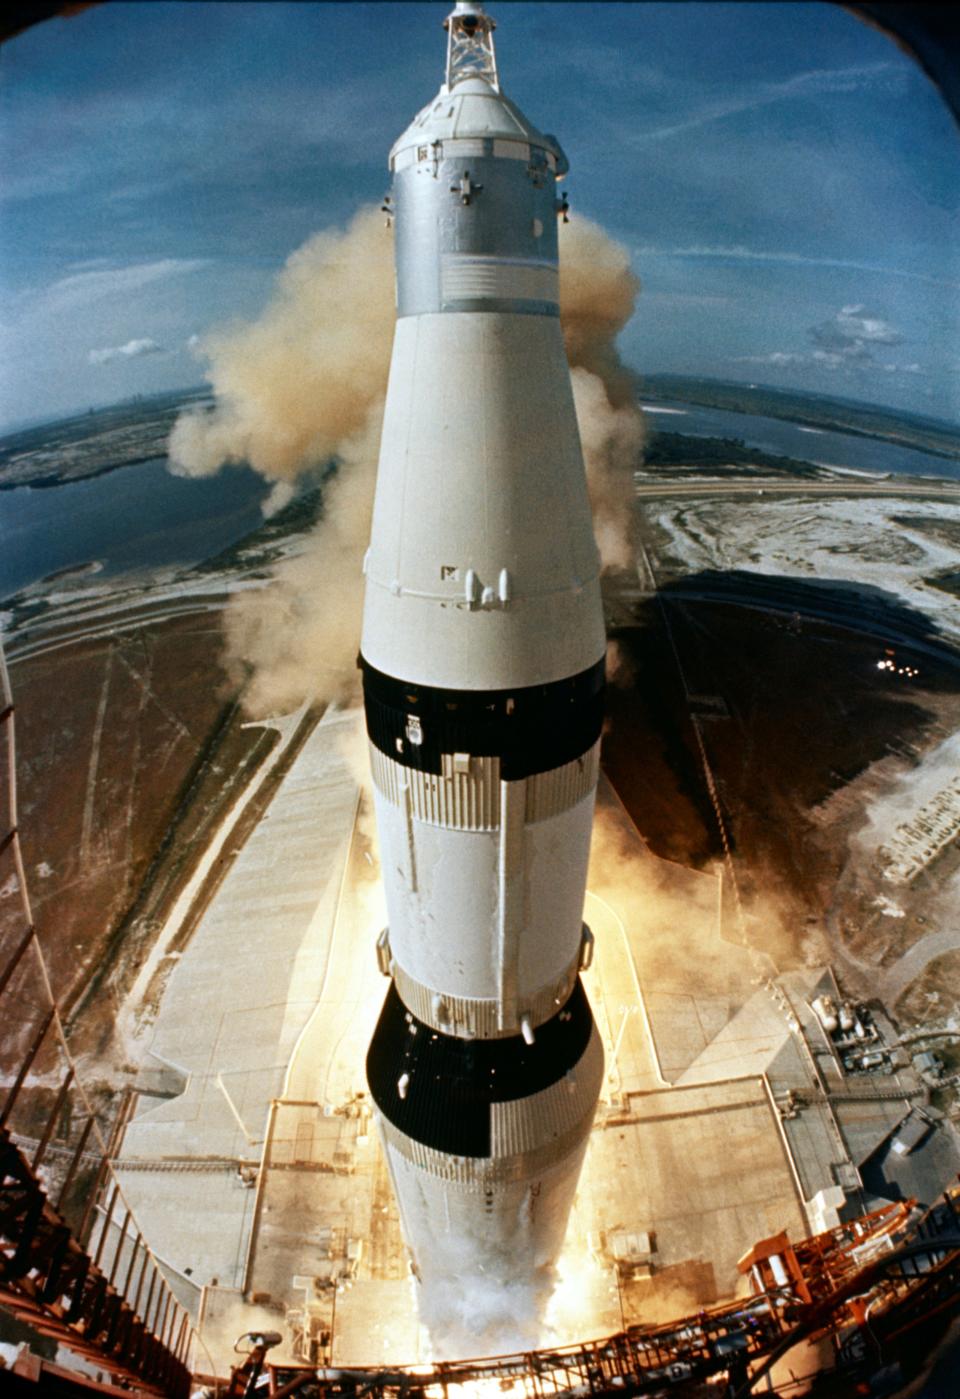 The rocket carrying the Apollo 11 crew launches from the Kennedy Space Center.